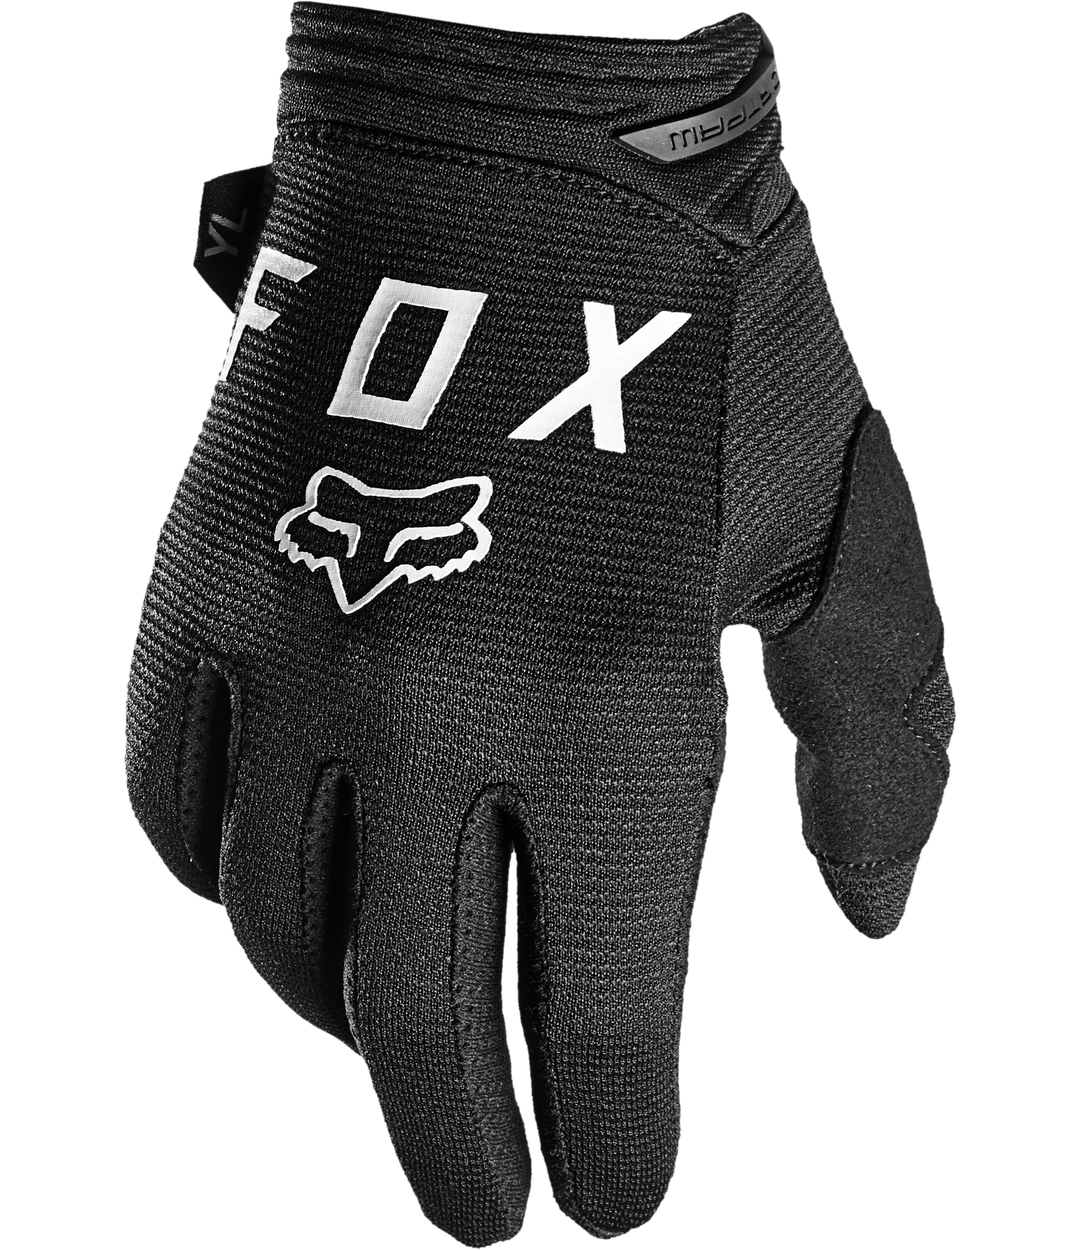 Guantes Mujer Fox DIRTPAW PRIX – Fox Racing Colombia